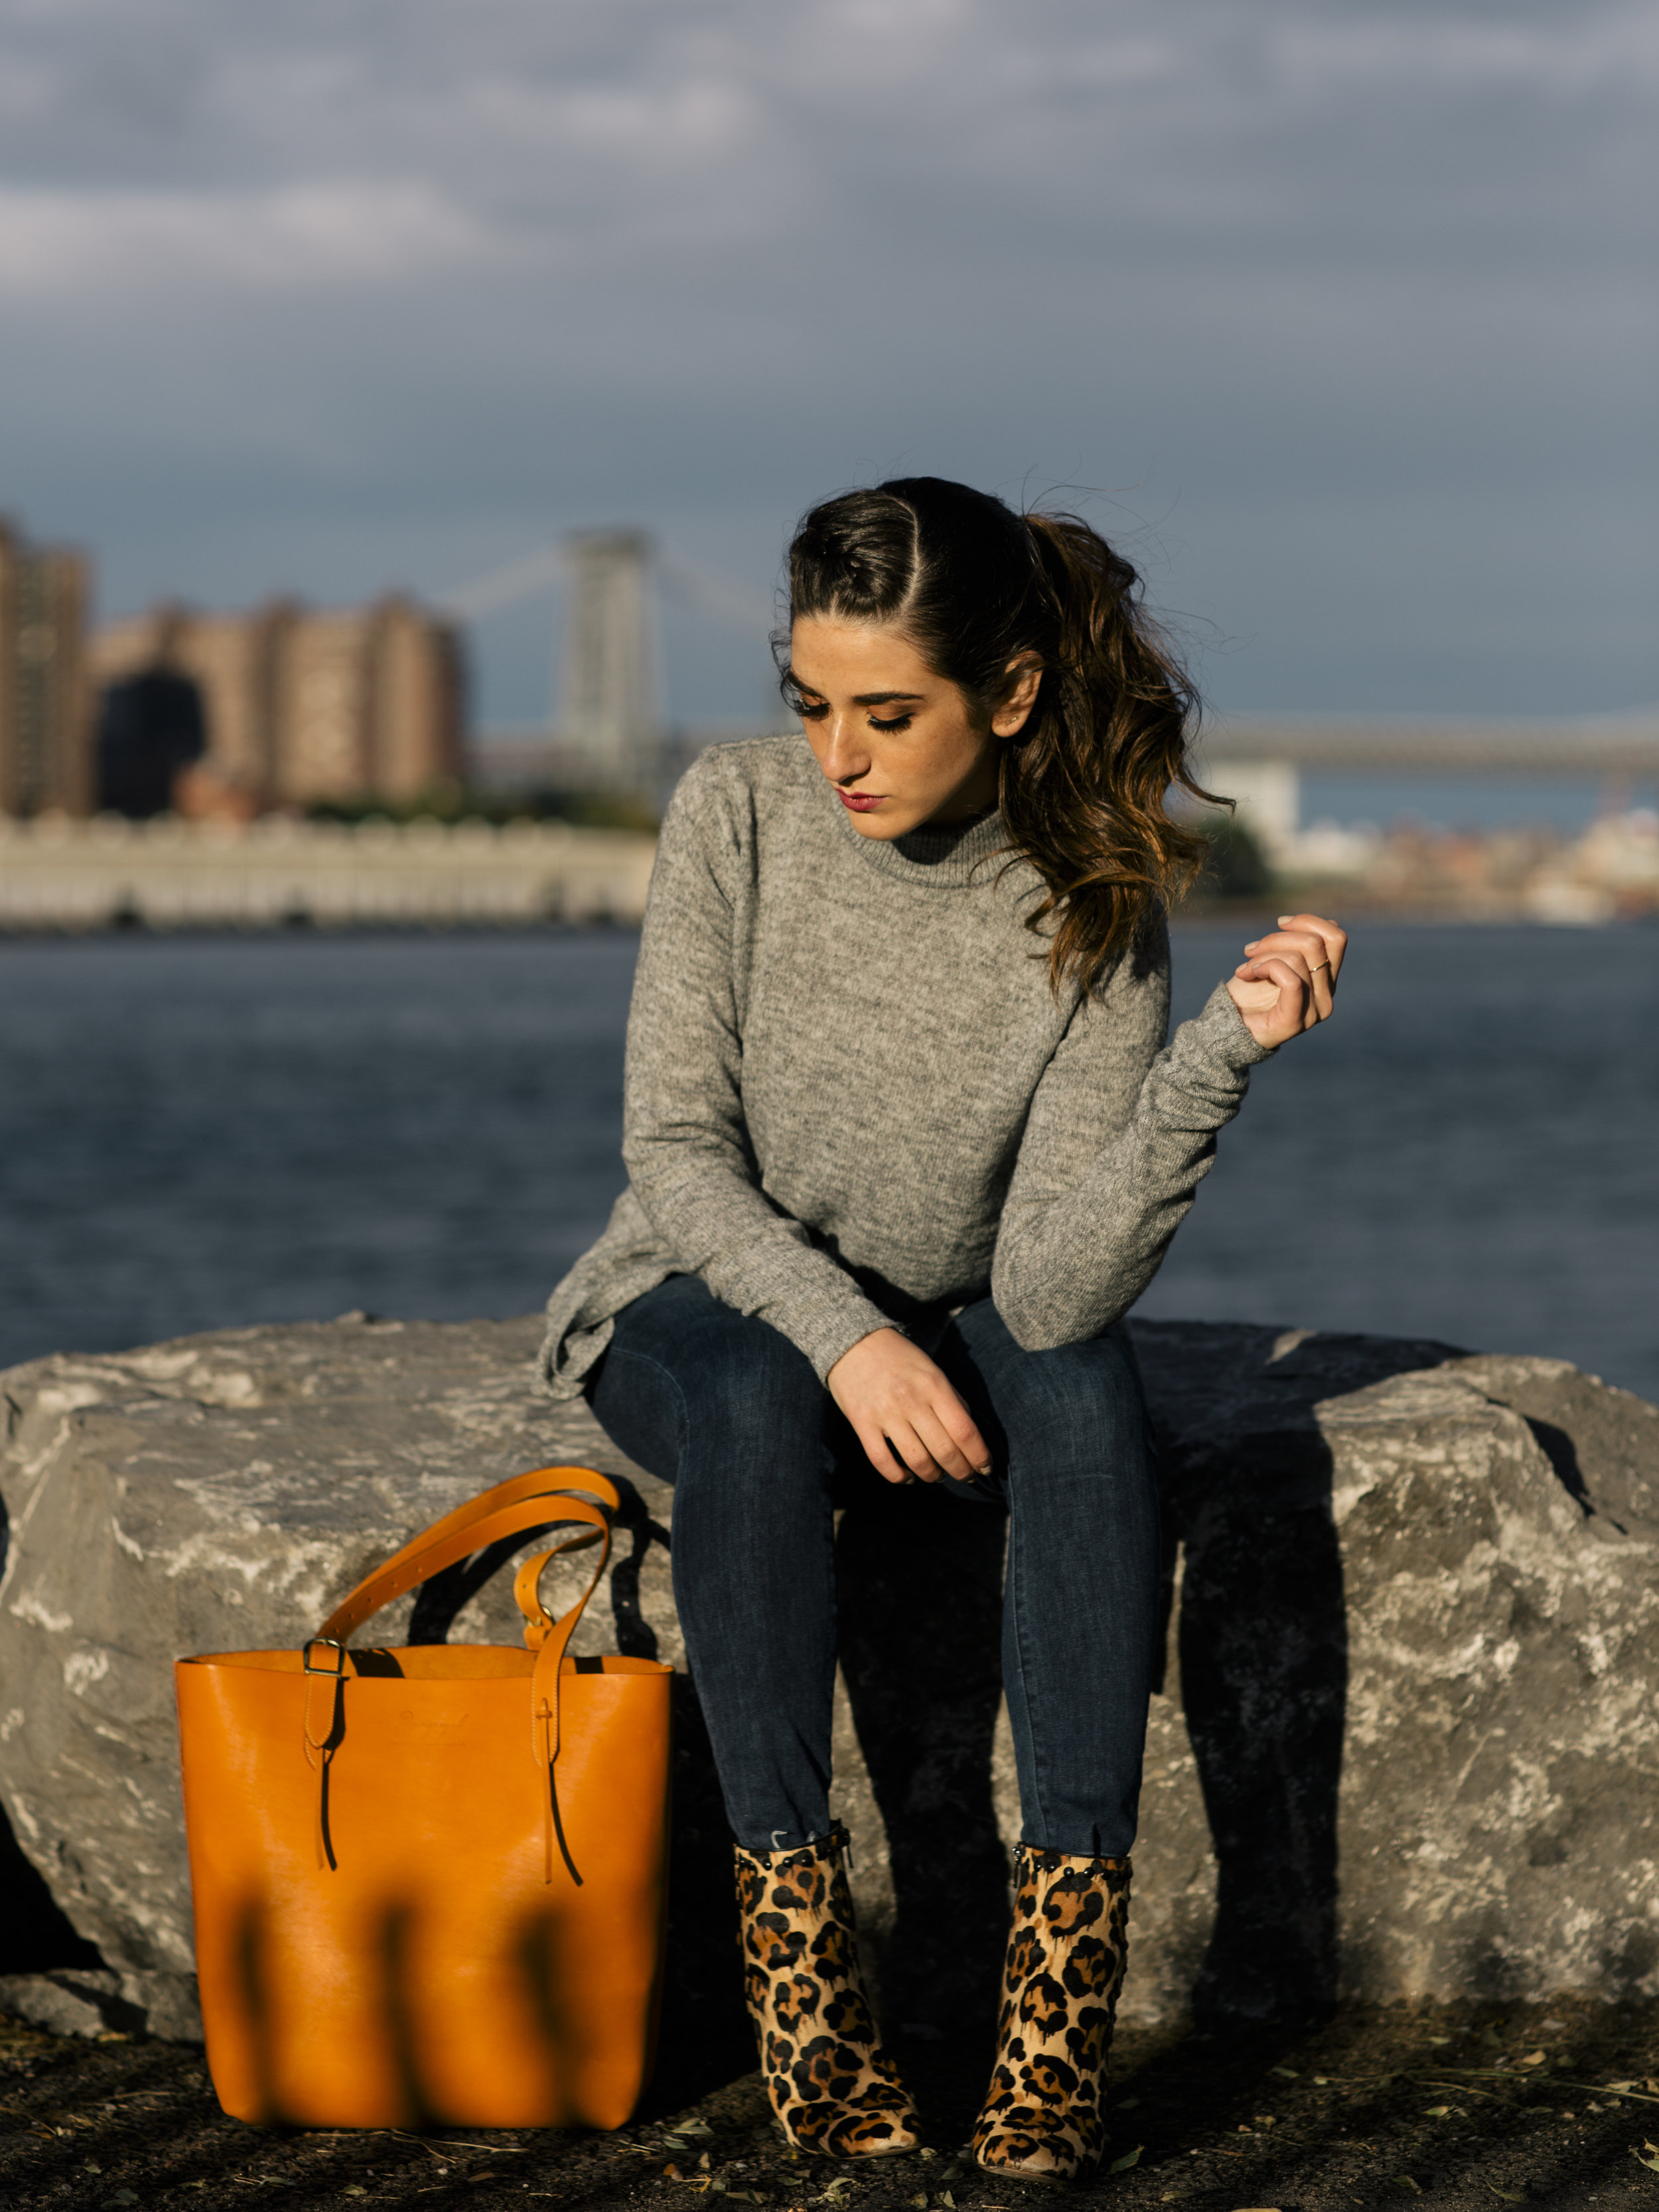 Long Grey Sweater Leopard Booties Louboutins & Love Fashion Blog Esther Santer NYC Street Style Blogger Outfit OOTD Trendy Hair Girl Women Leather Bag Jeans Denim Pretty Photoshoot Dumbo Brooklyn Shoes Fall Winter Inspo Wear Shop Beautiful Turtleneck.jpg